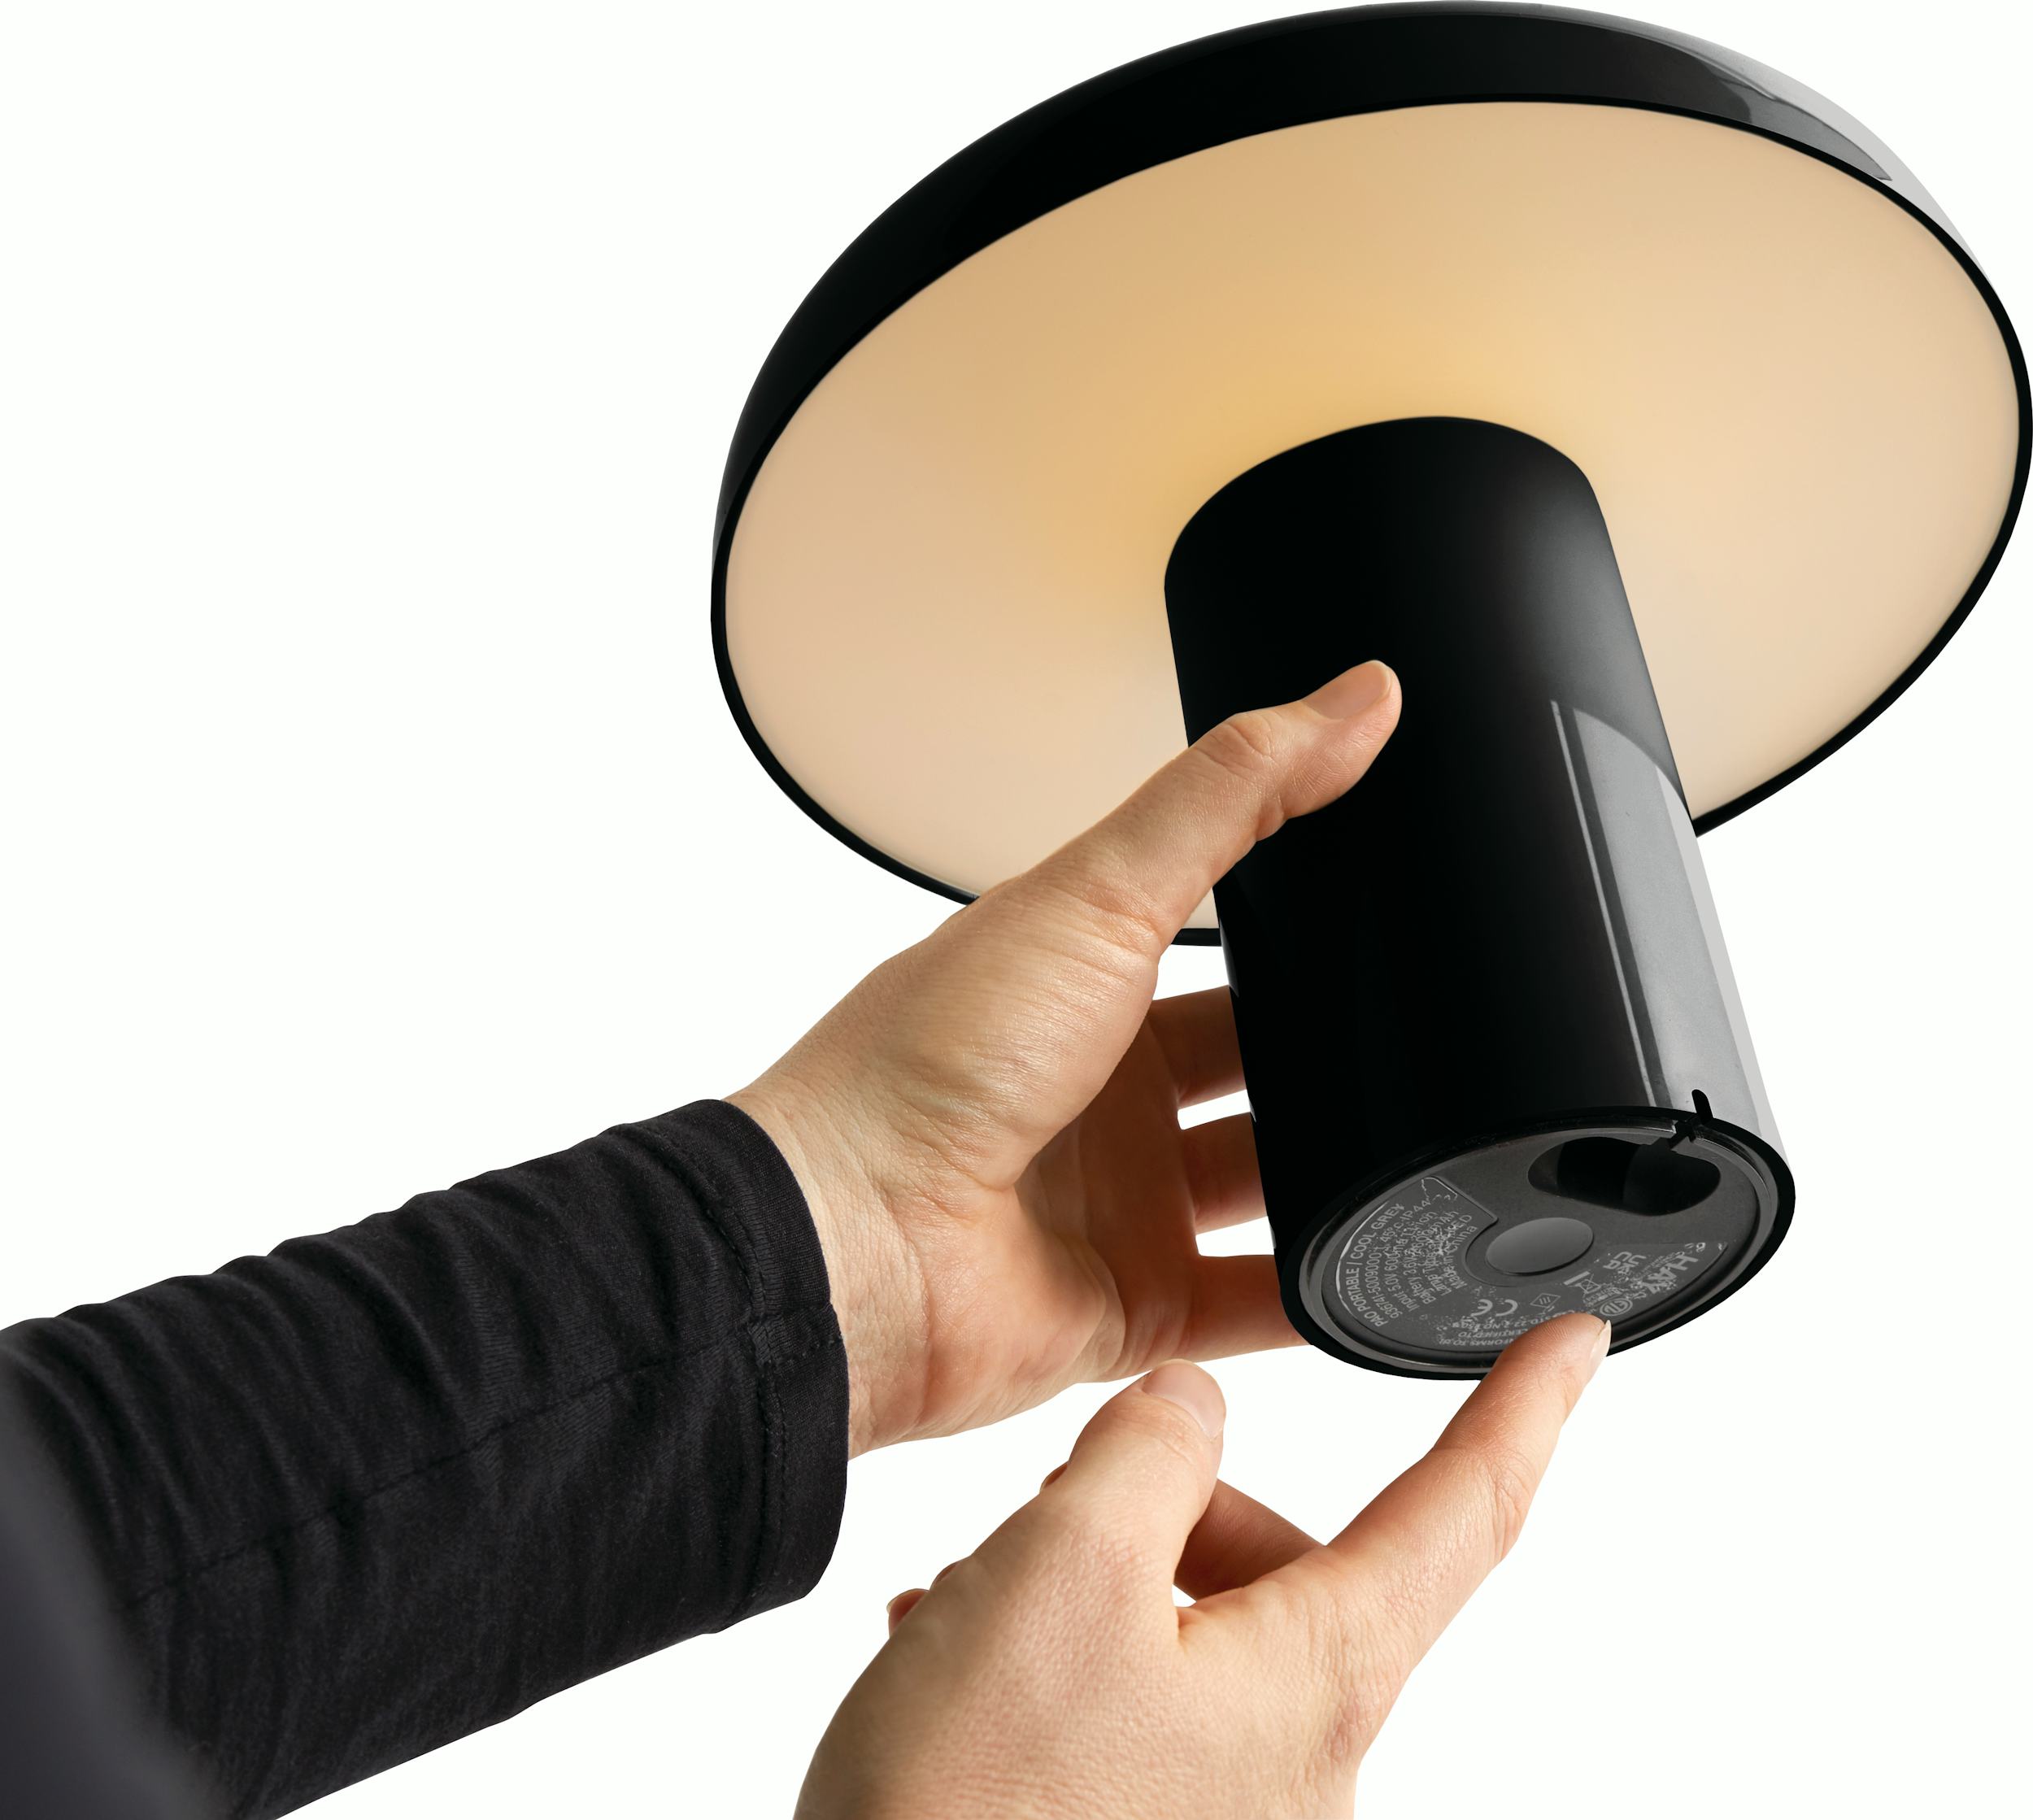 Pao Portable Lamp – Design Within Reach